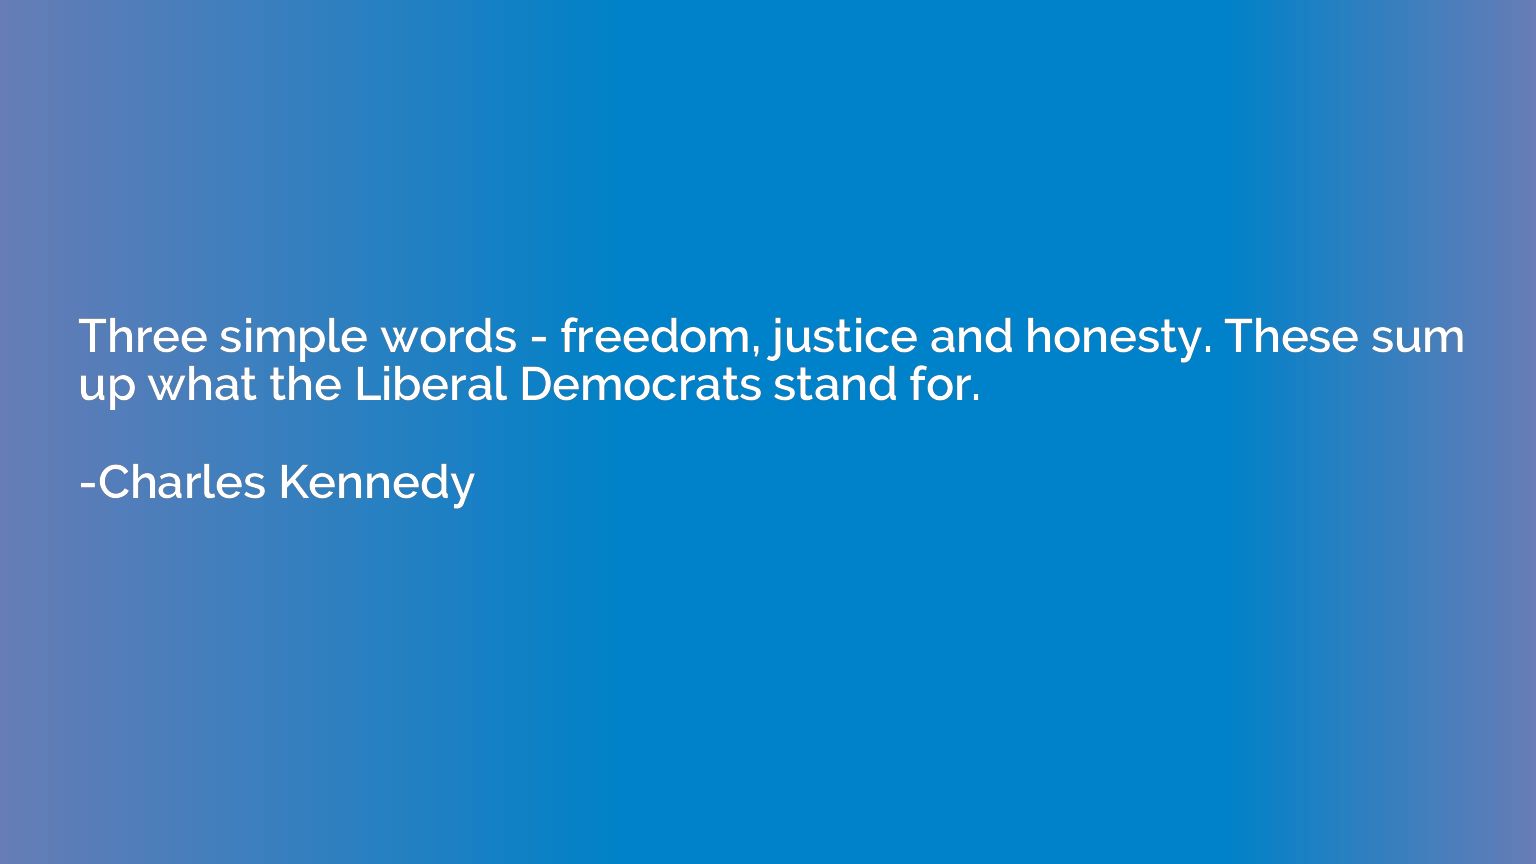 Three simple words - freedom, justice and honesty. These sum